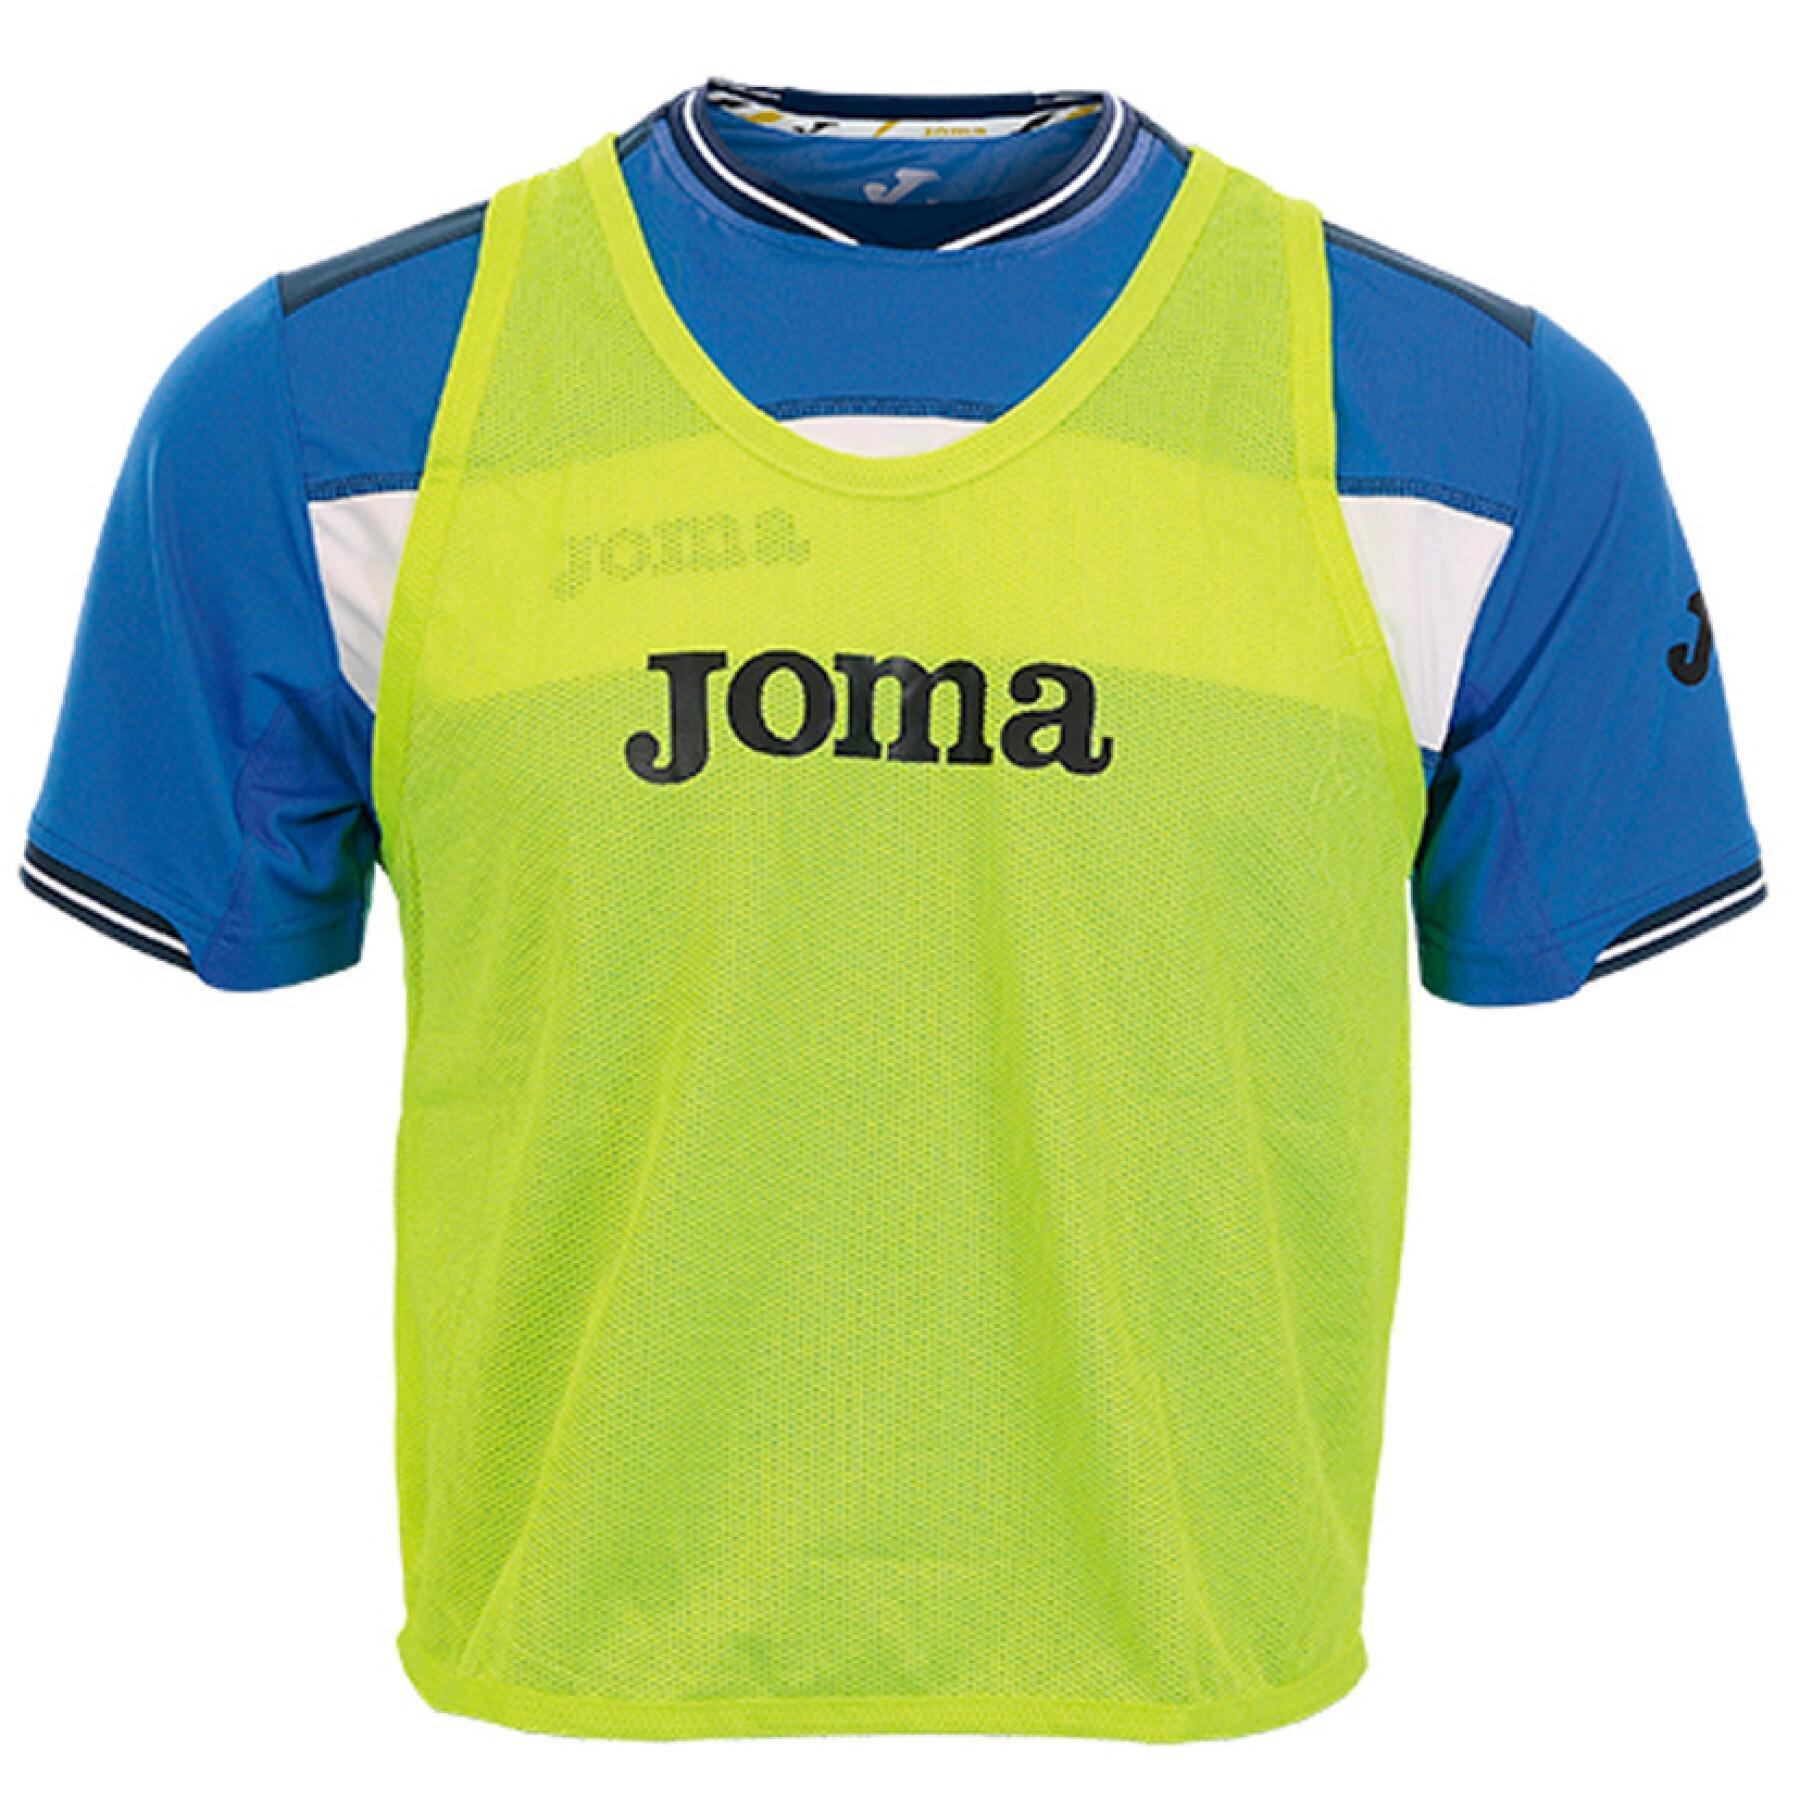 Pack of 10 chasubles Joma training